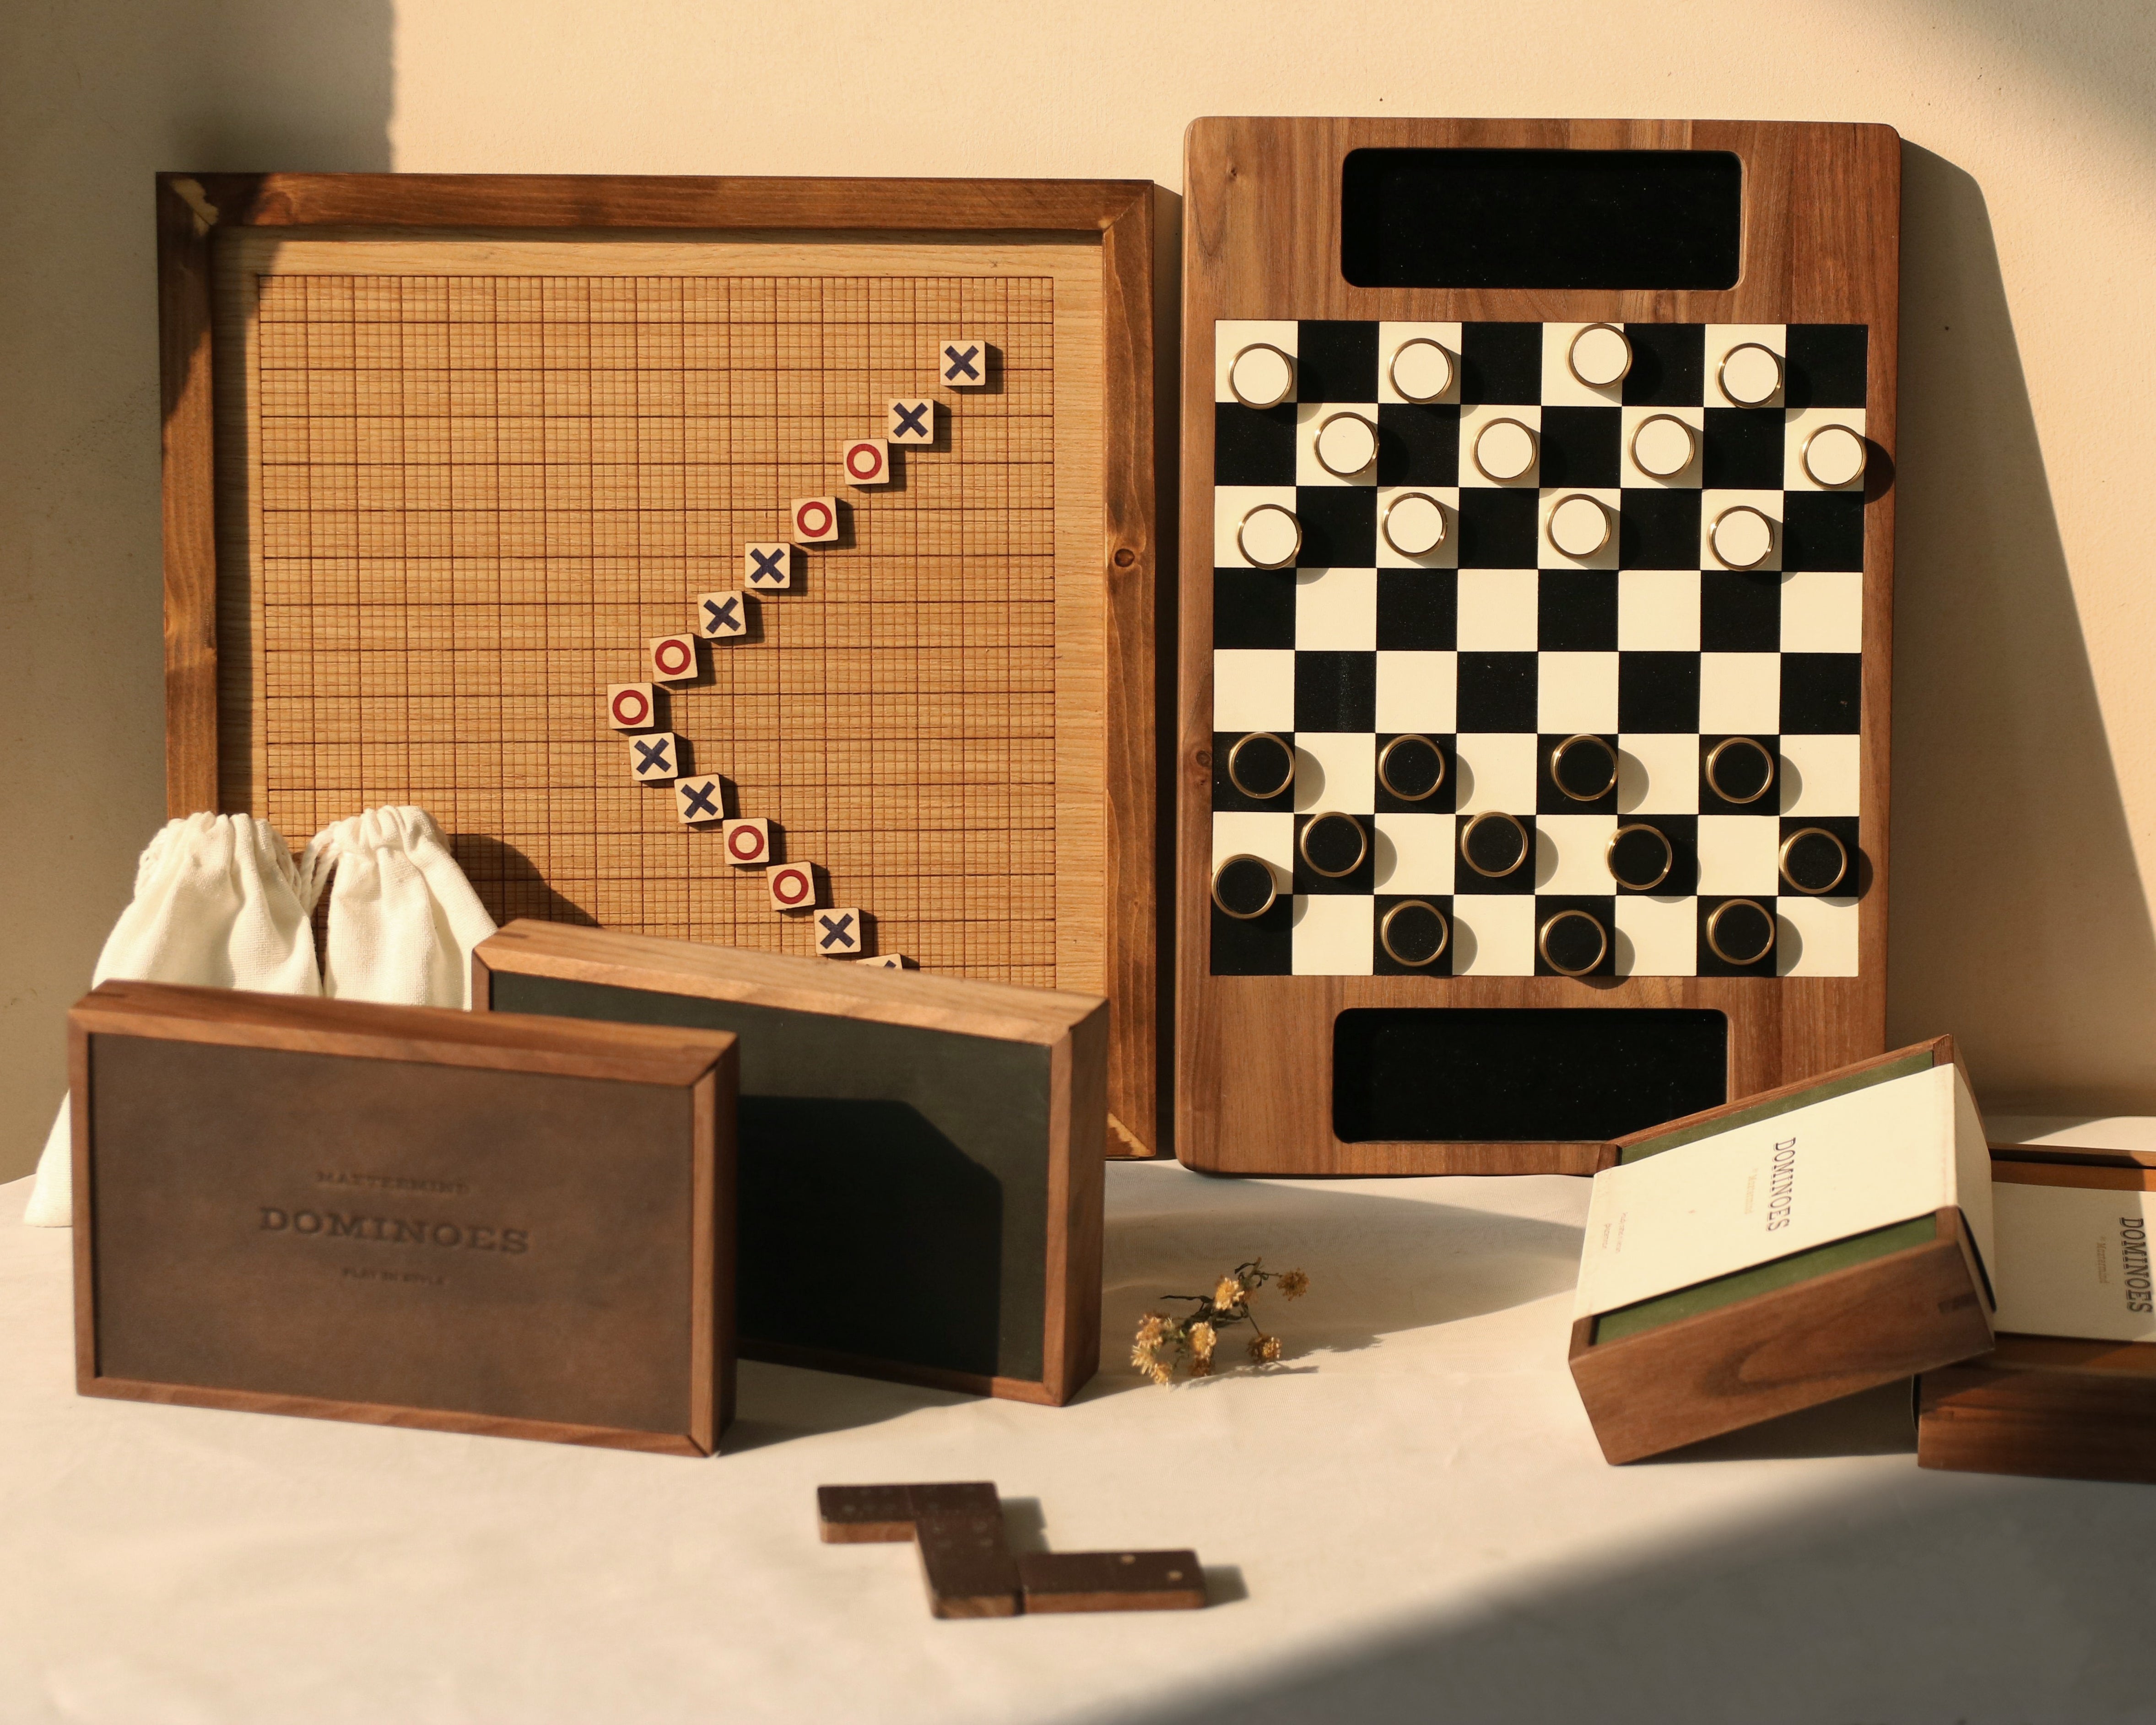 Easter Gifts for Coworkers: Top 6 Quick 2-Player Board Games